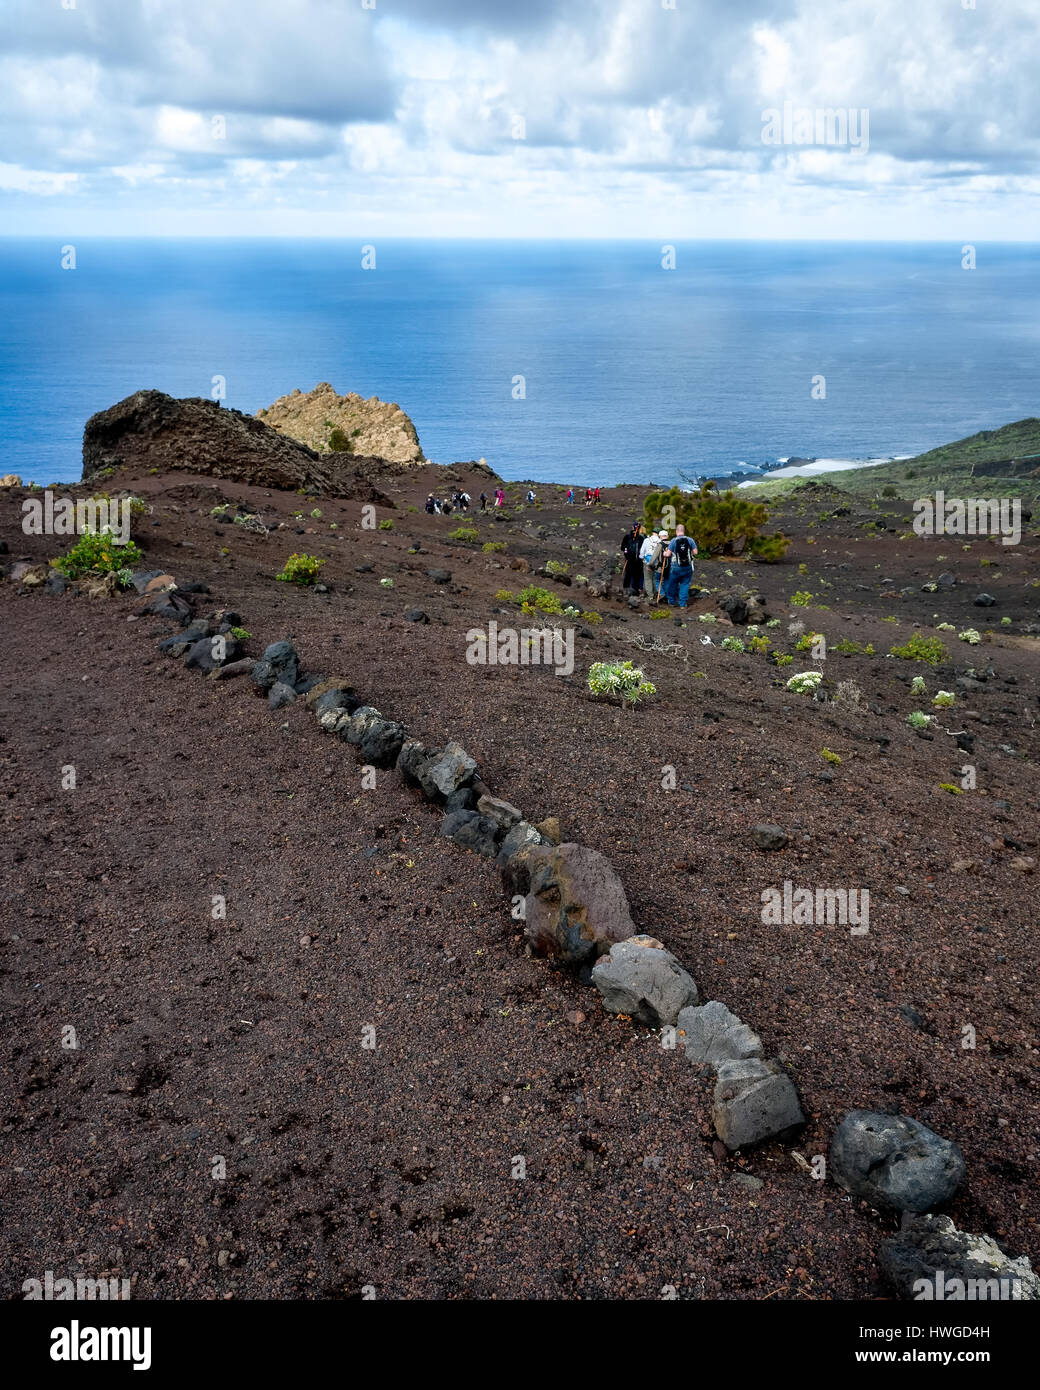 Cumbre Vieja, Fuencaliente. La Palma.  A distant view of the ancient rocks of the island that were buried in lava until recently rediscovered.  Hikers walking along the windy trail footpath that passes the ancient stone.  The footpath is marked out by a trail of lava rocks. Stock Photo